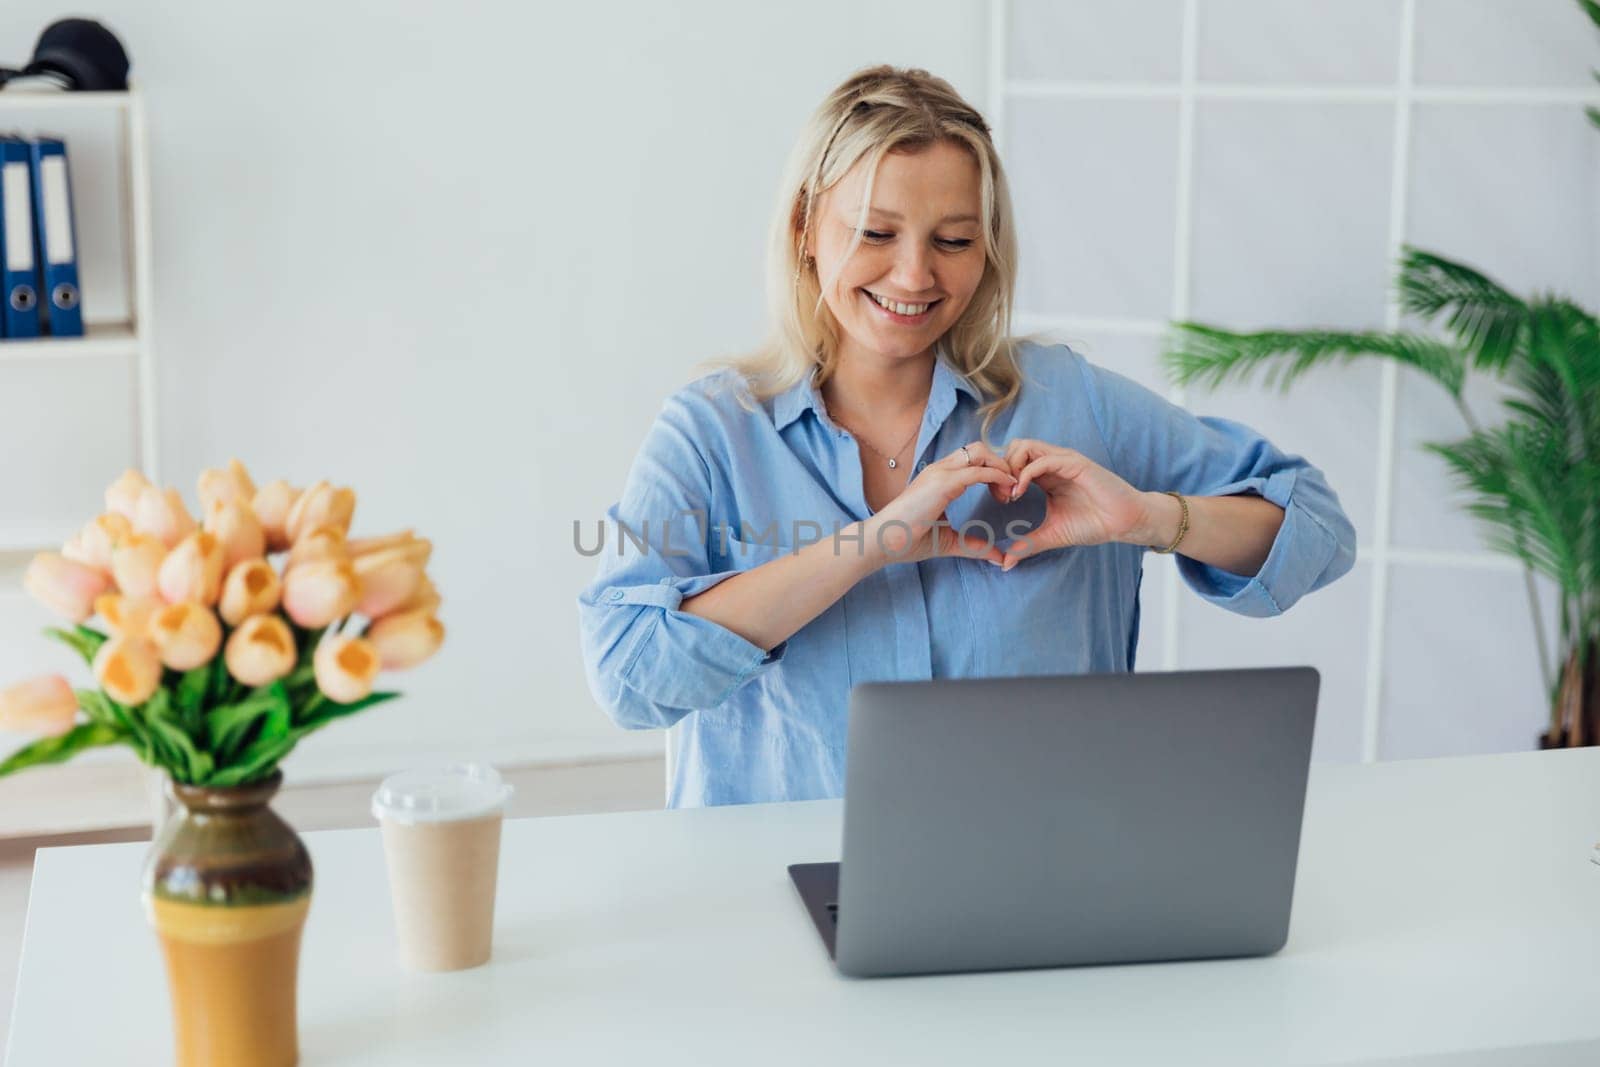 Friendly professional woman making a heart shaped sign indicating positivity and love. Corporate female employee sitting at office desk showing positive feelings while working.